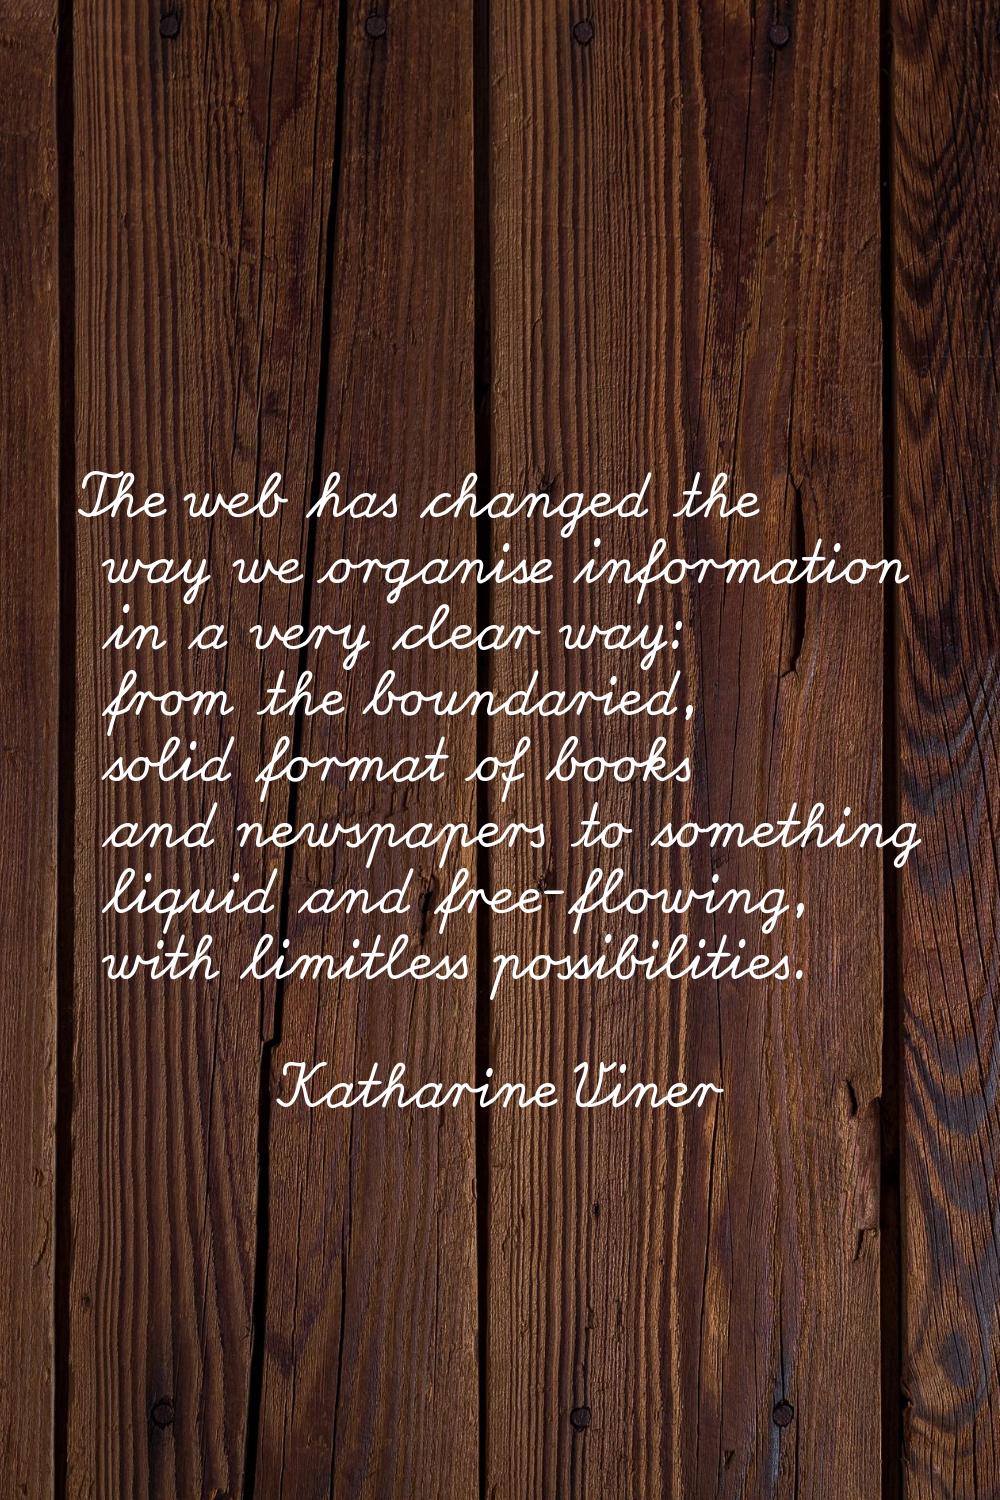 The web has changed the way we organise information in a very clear way: from the boundaried, solid